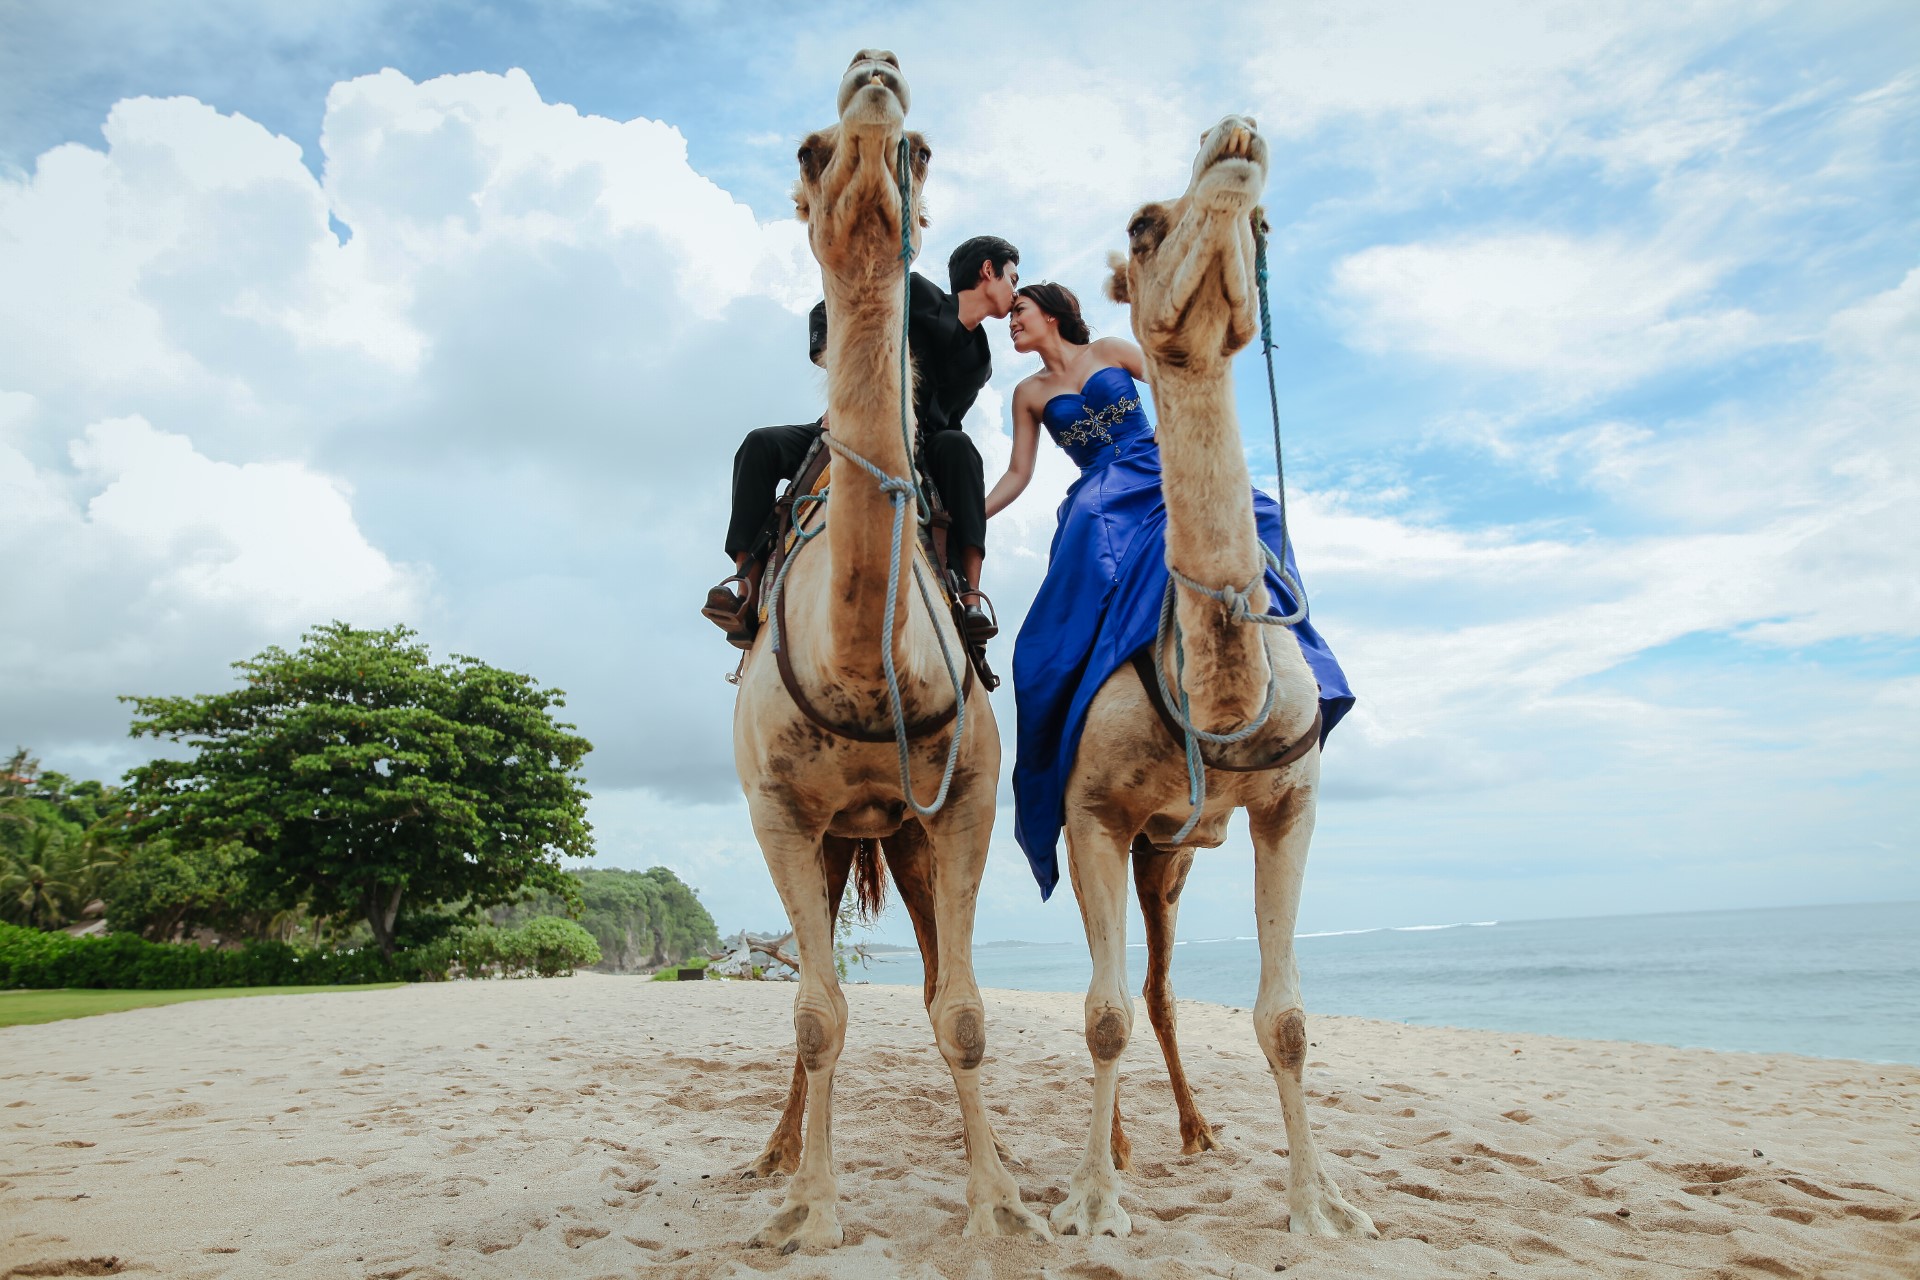 Top 5 Amazing Locations For Pre-Wedding Photoshoot In Bali